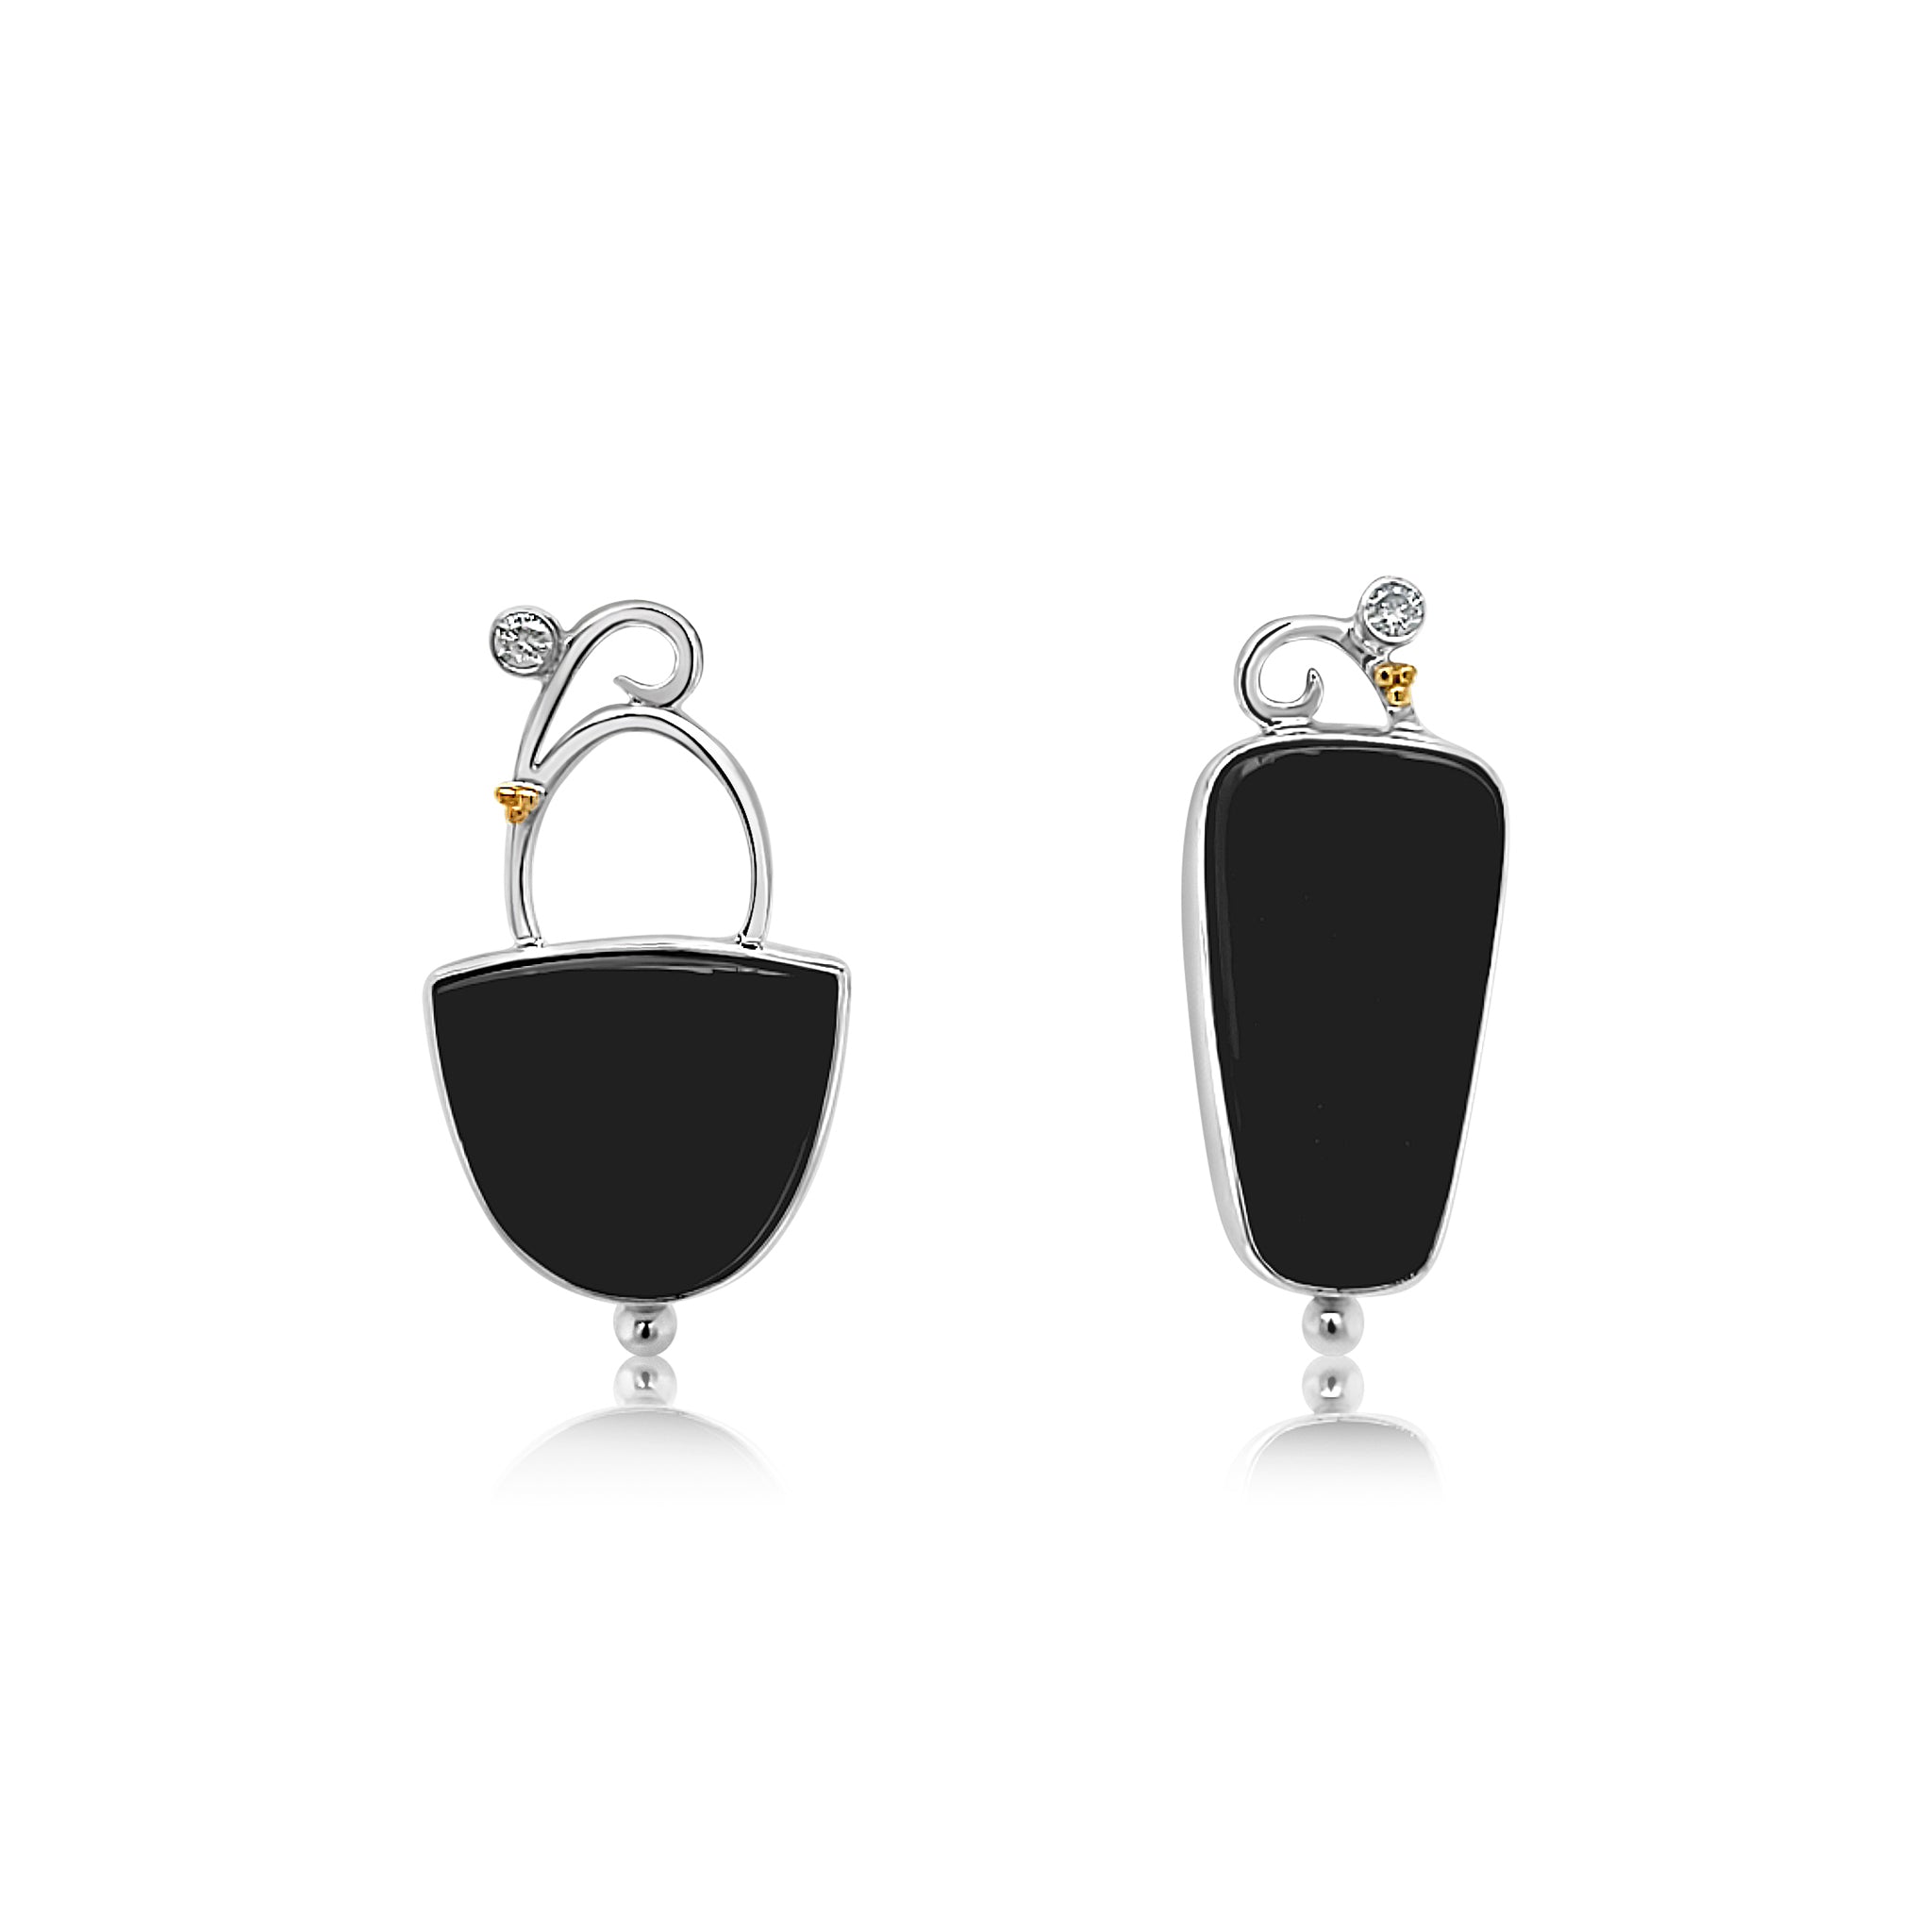 Asymmetric Natural Surface Black Onyx, Cubic Zirconia and Freshwater Pearls set in Sterling Silver with 22k Gold accents.